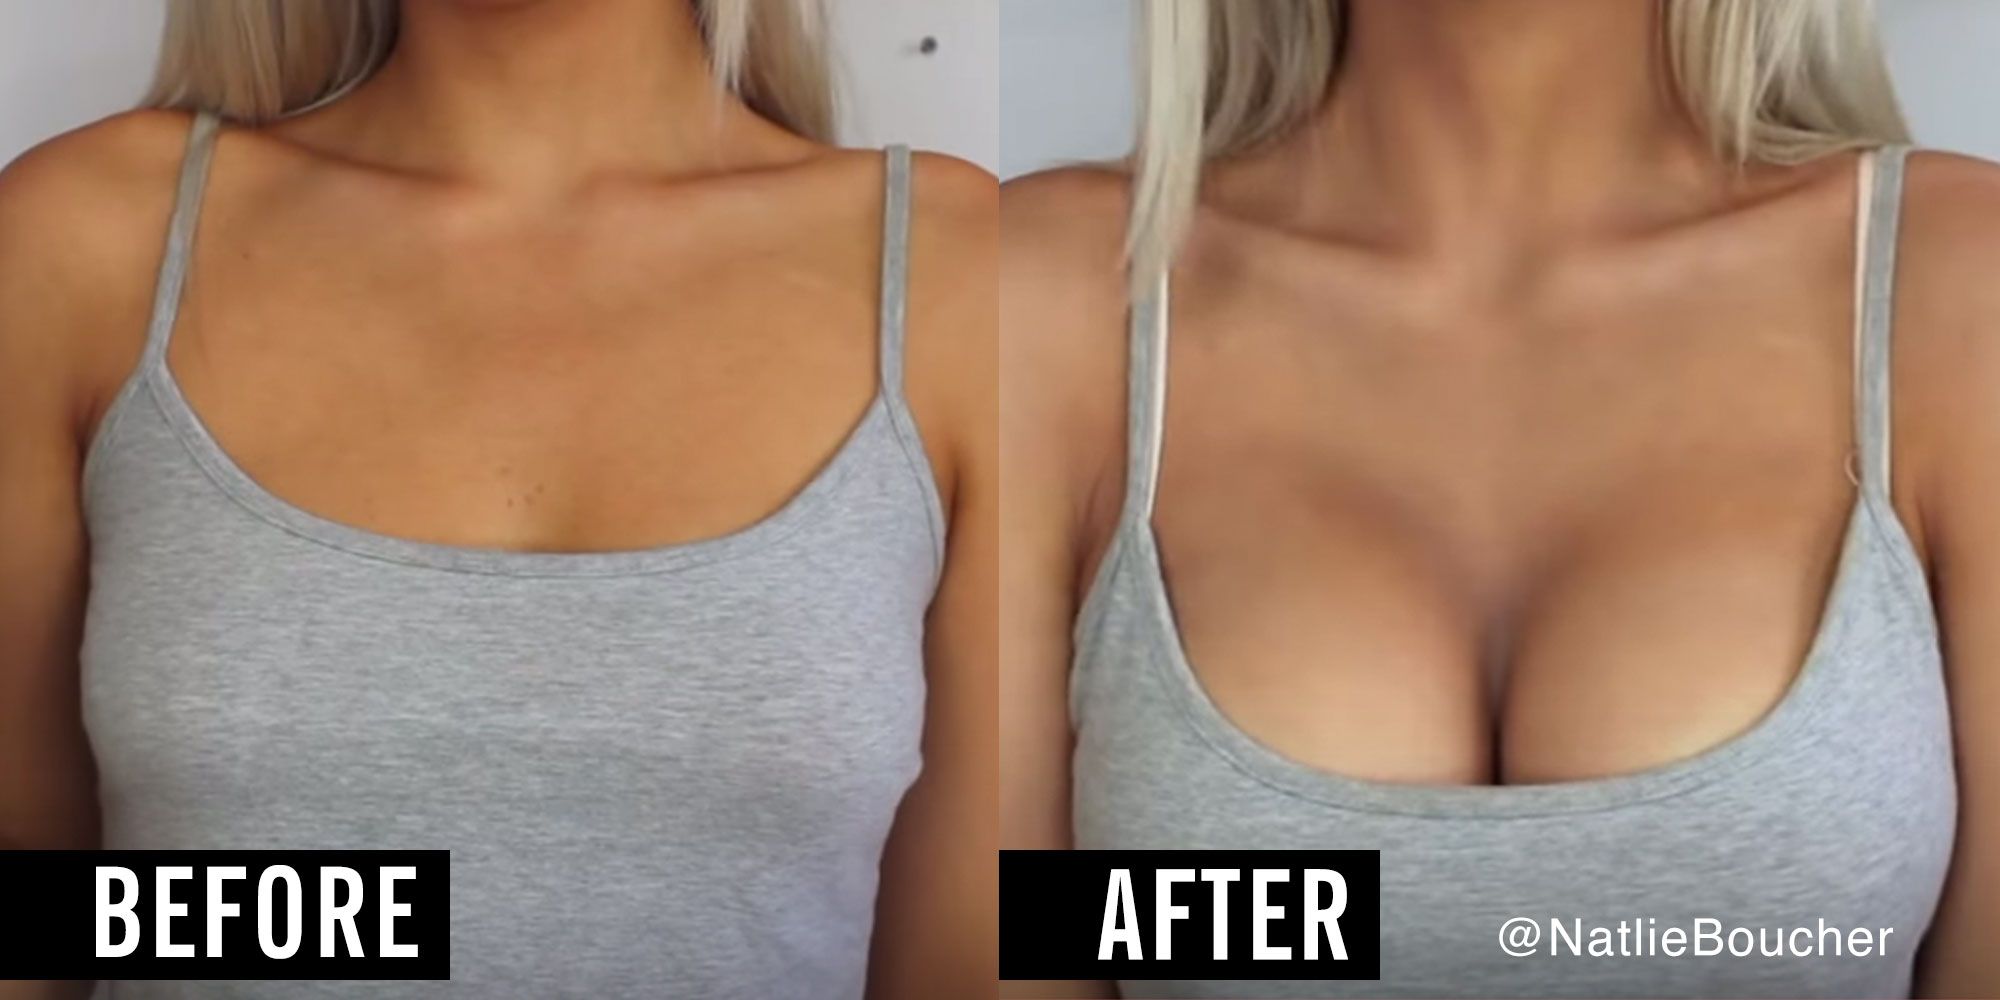 How To Use Makeup To Actually Make Your Boobs Look Bigger